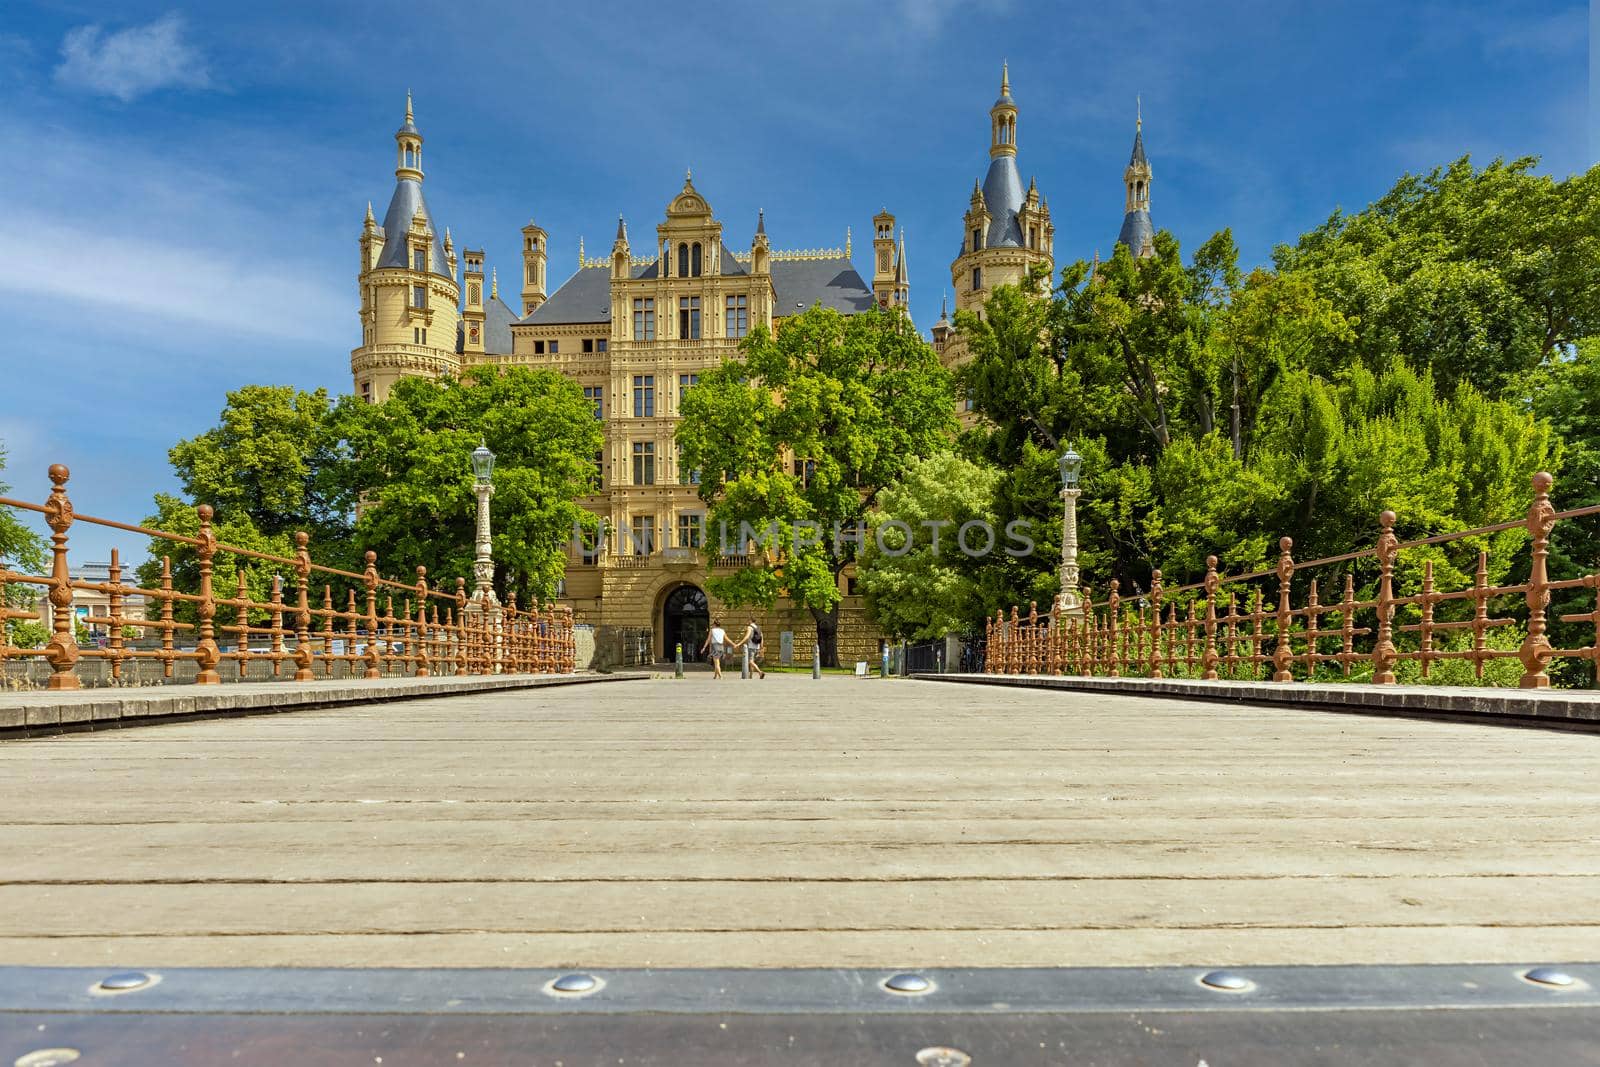 Schwerin Palace, in the city of Schwerin the capital of Mecklenburg-Vorpommern, Germany  by seka33